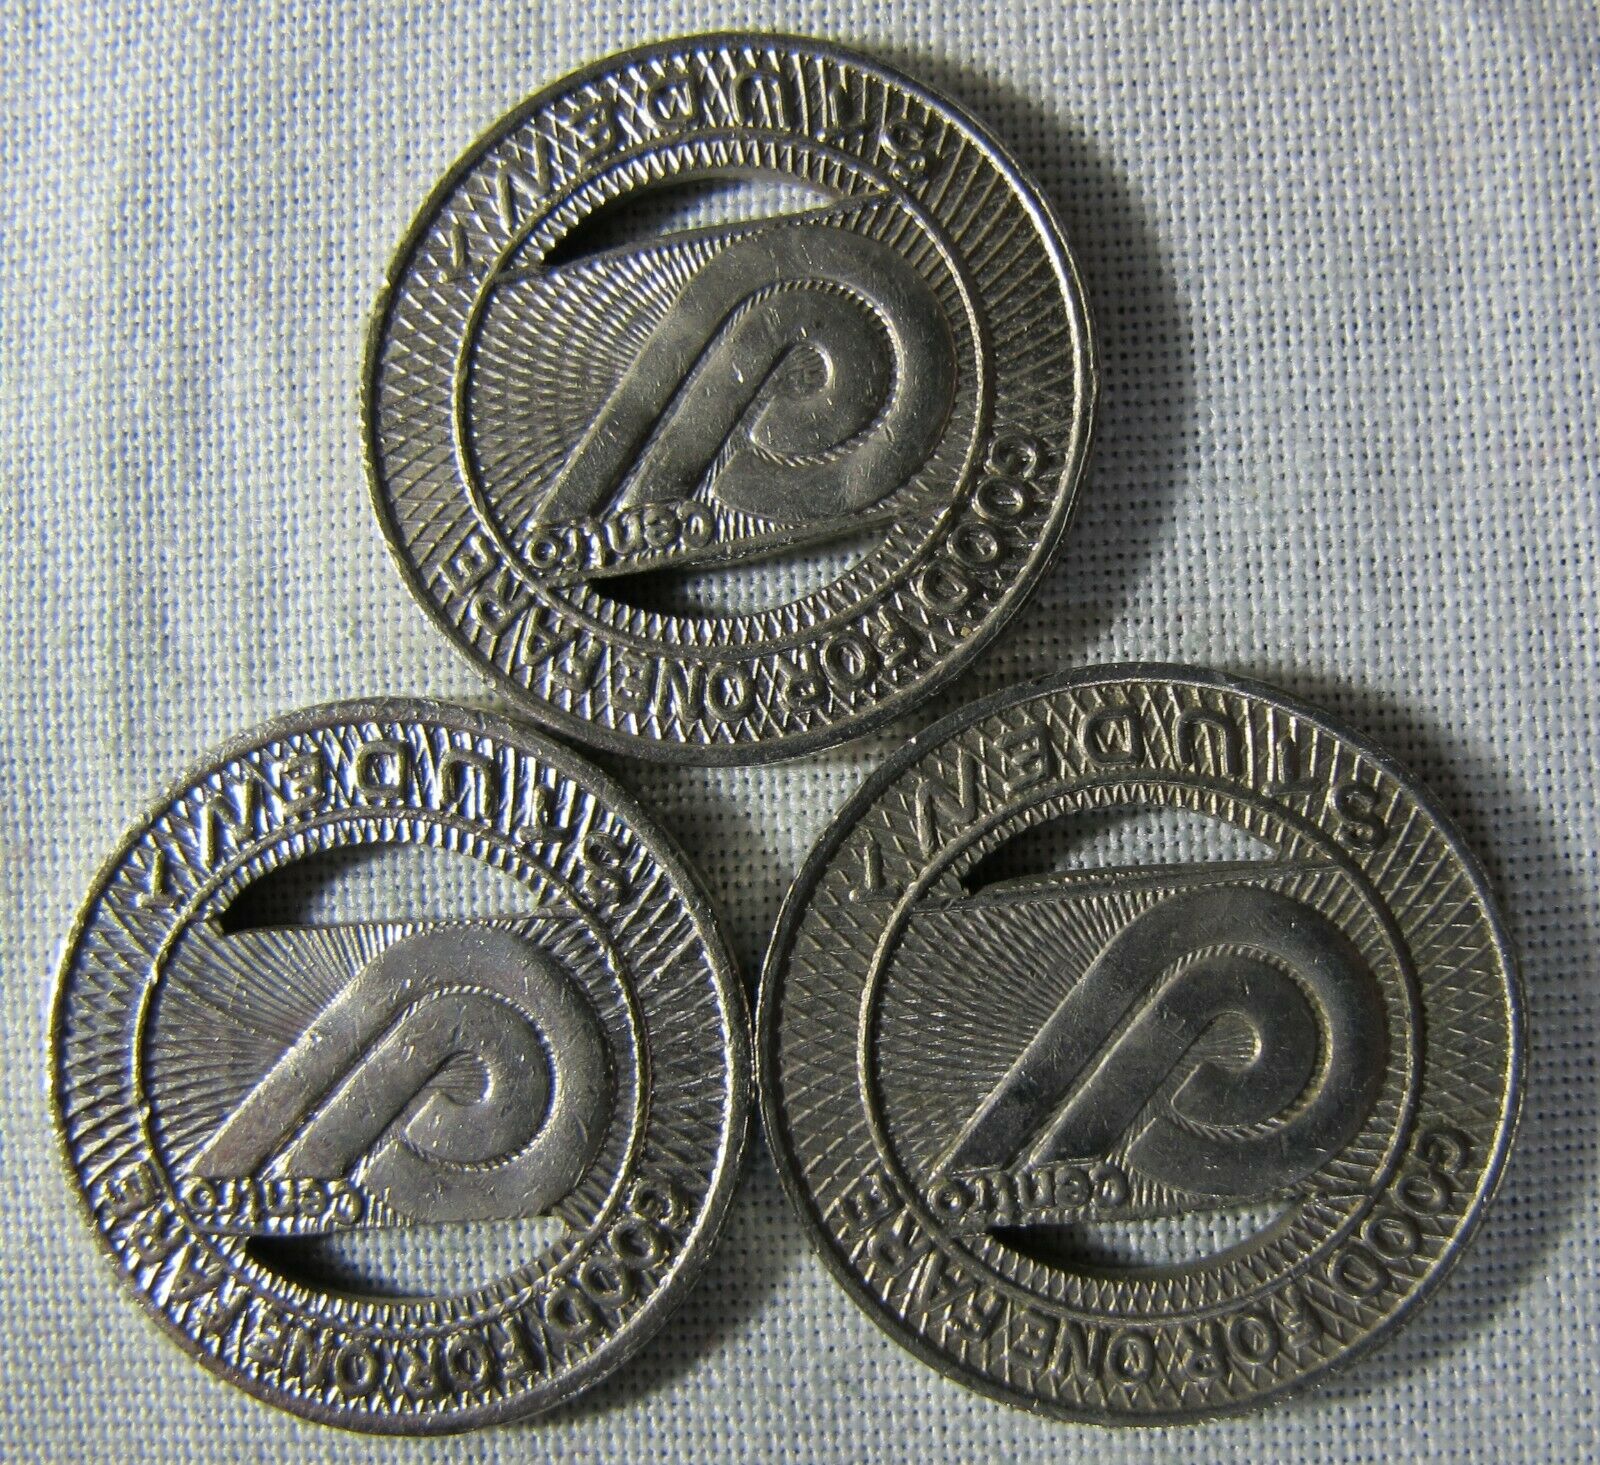 Syracuse Centro Student Bus Tokens Lot Of 3 Whotoldya Lot 61219